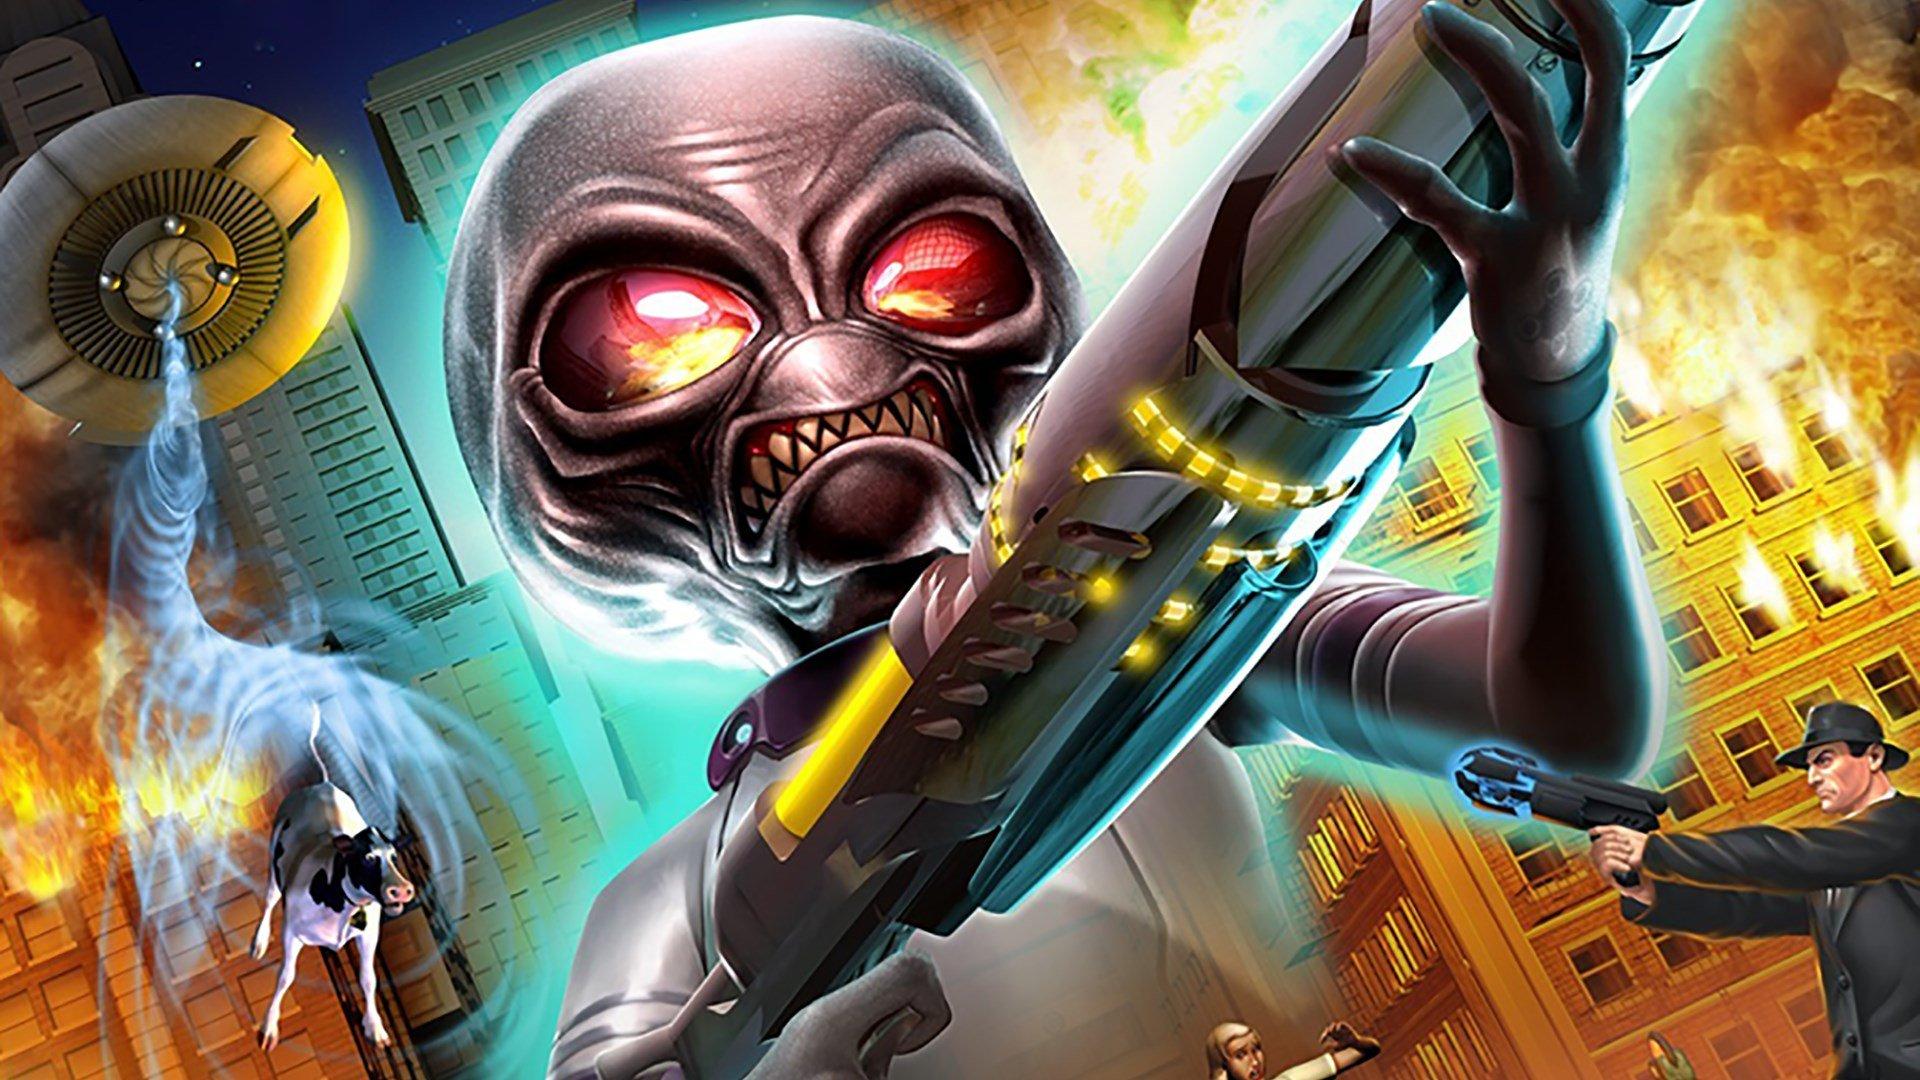 Rumour: Destroy All Humans to Return to Earth at E3 2019